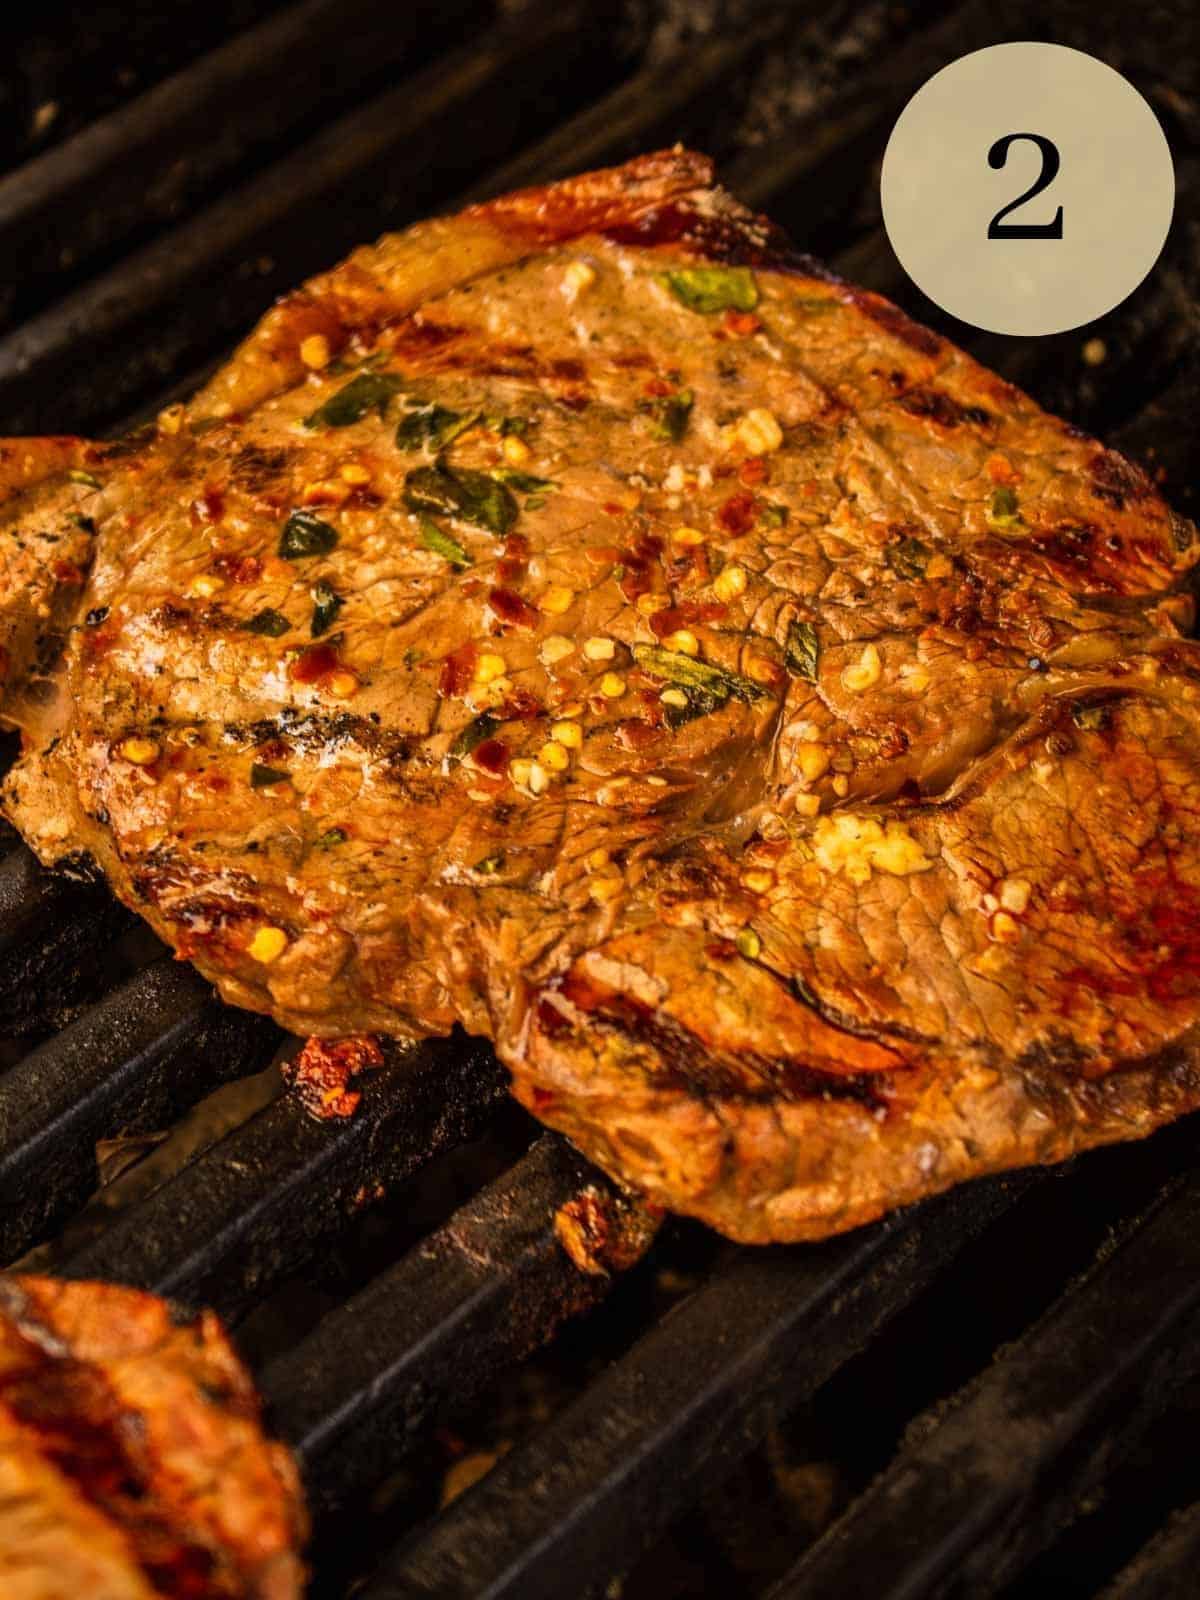 marinated and seasoned italian steak cooking on the grill.